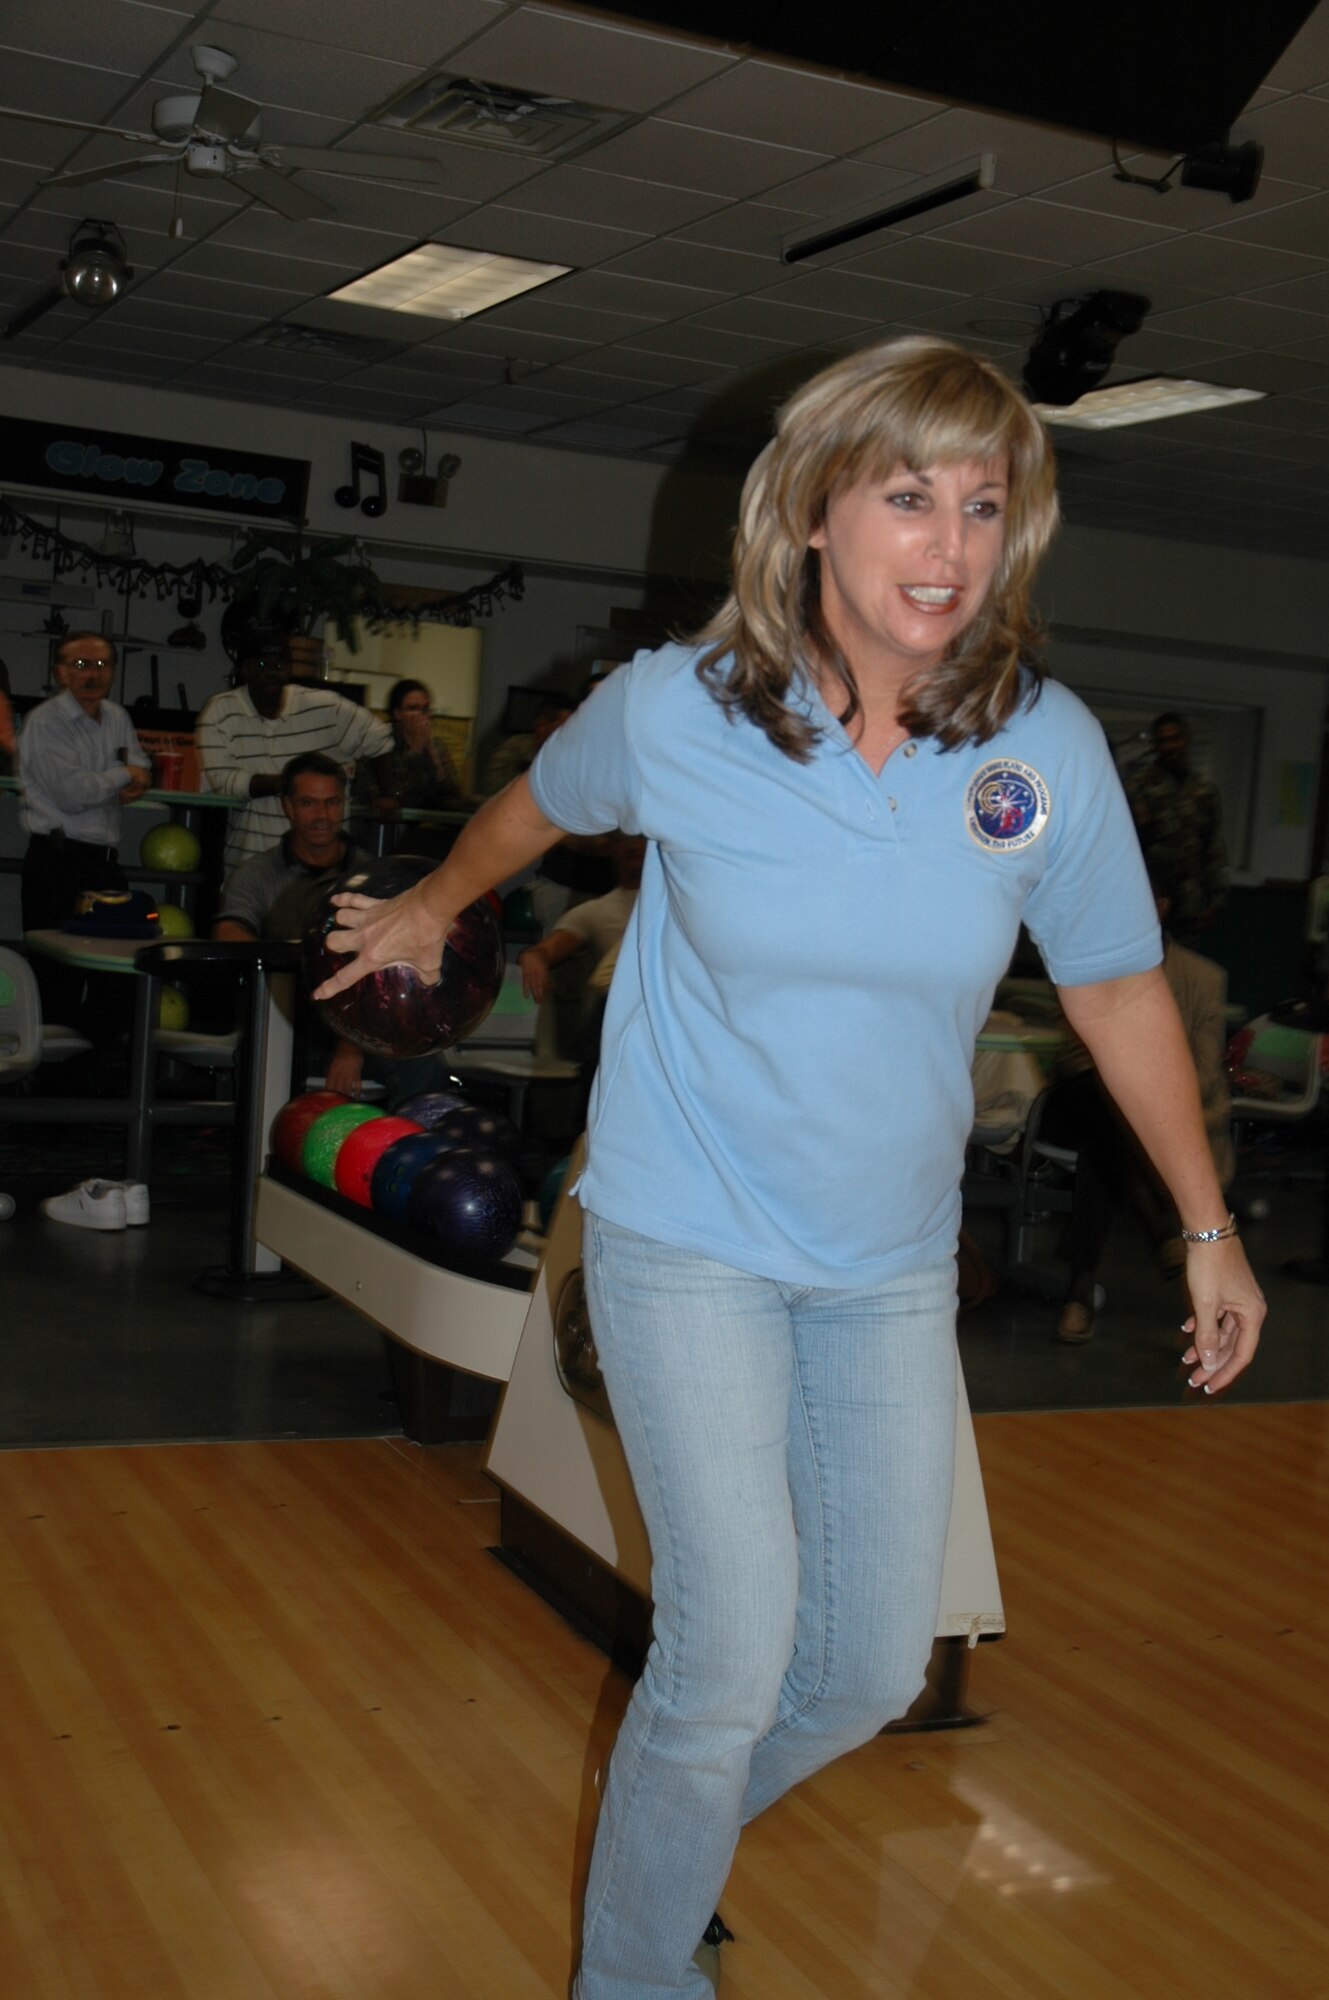 Catherine Wager, from the 45th Space Wing Plans & Programs office, takes dead aim at the ten pins where she hopes to throw a strike in the Rocket Lanes Bowling Center during Patrick Air Force Base and Cape Canaveral Air Force Station’s inaugural Wingman Day Nov. 25. (U.S. Air Force photo by Chris Calkins)